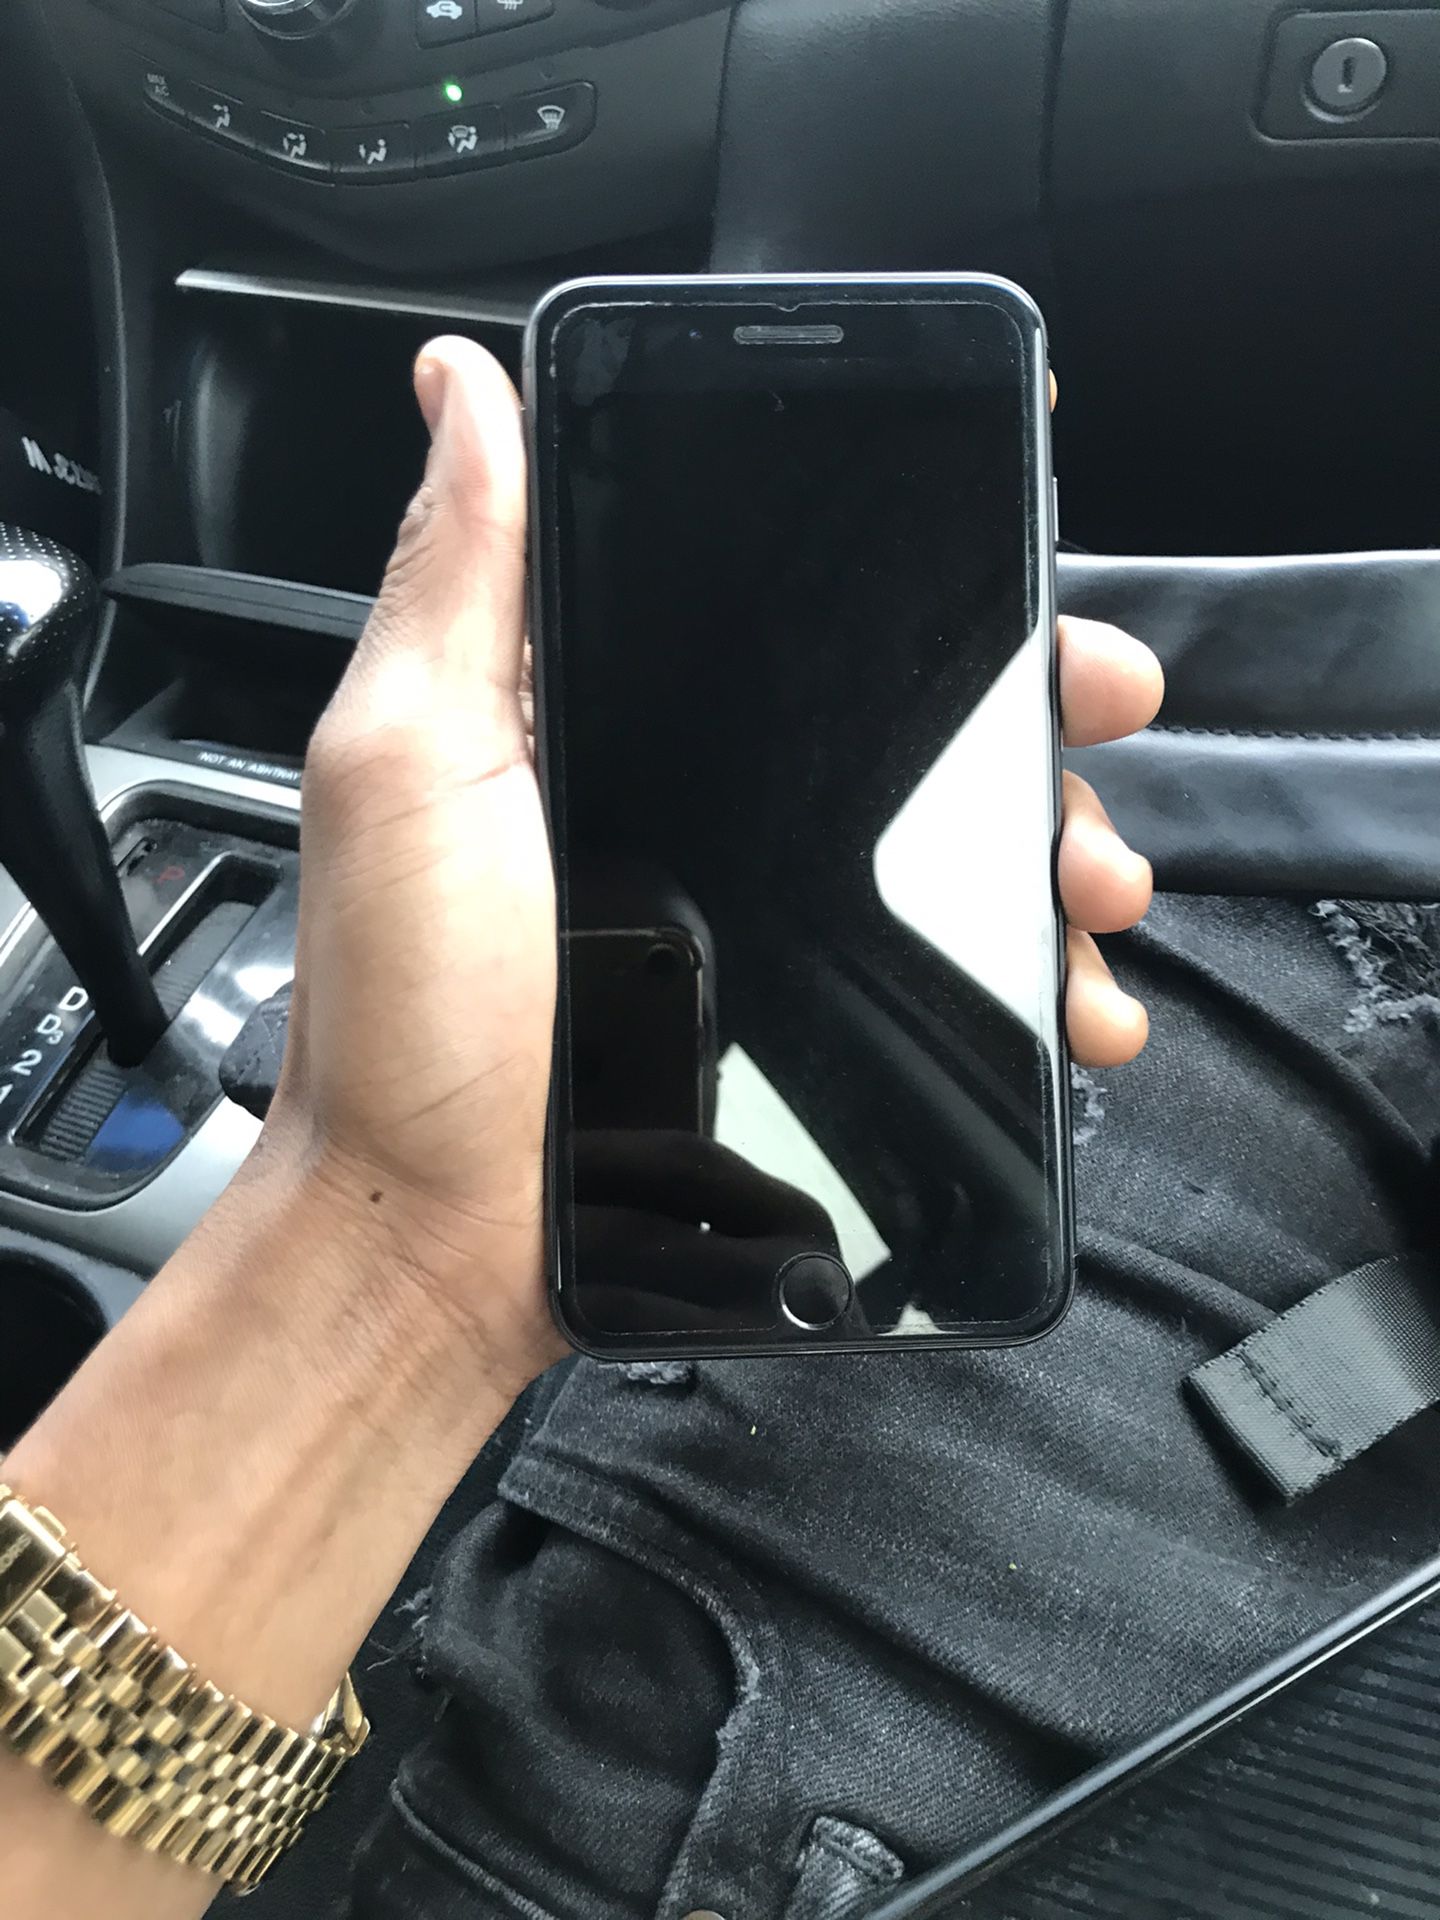 Brand new unlocked iPhone 8 Plus fresh no scratches !! Deliver or pickup